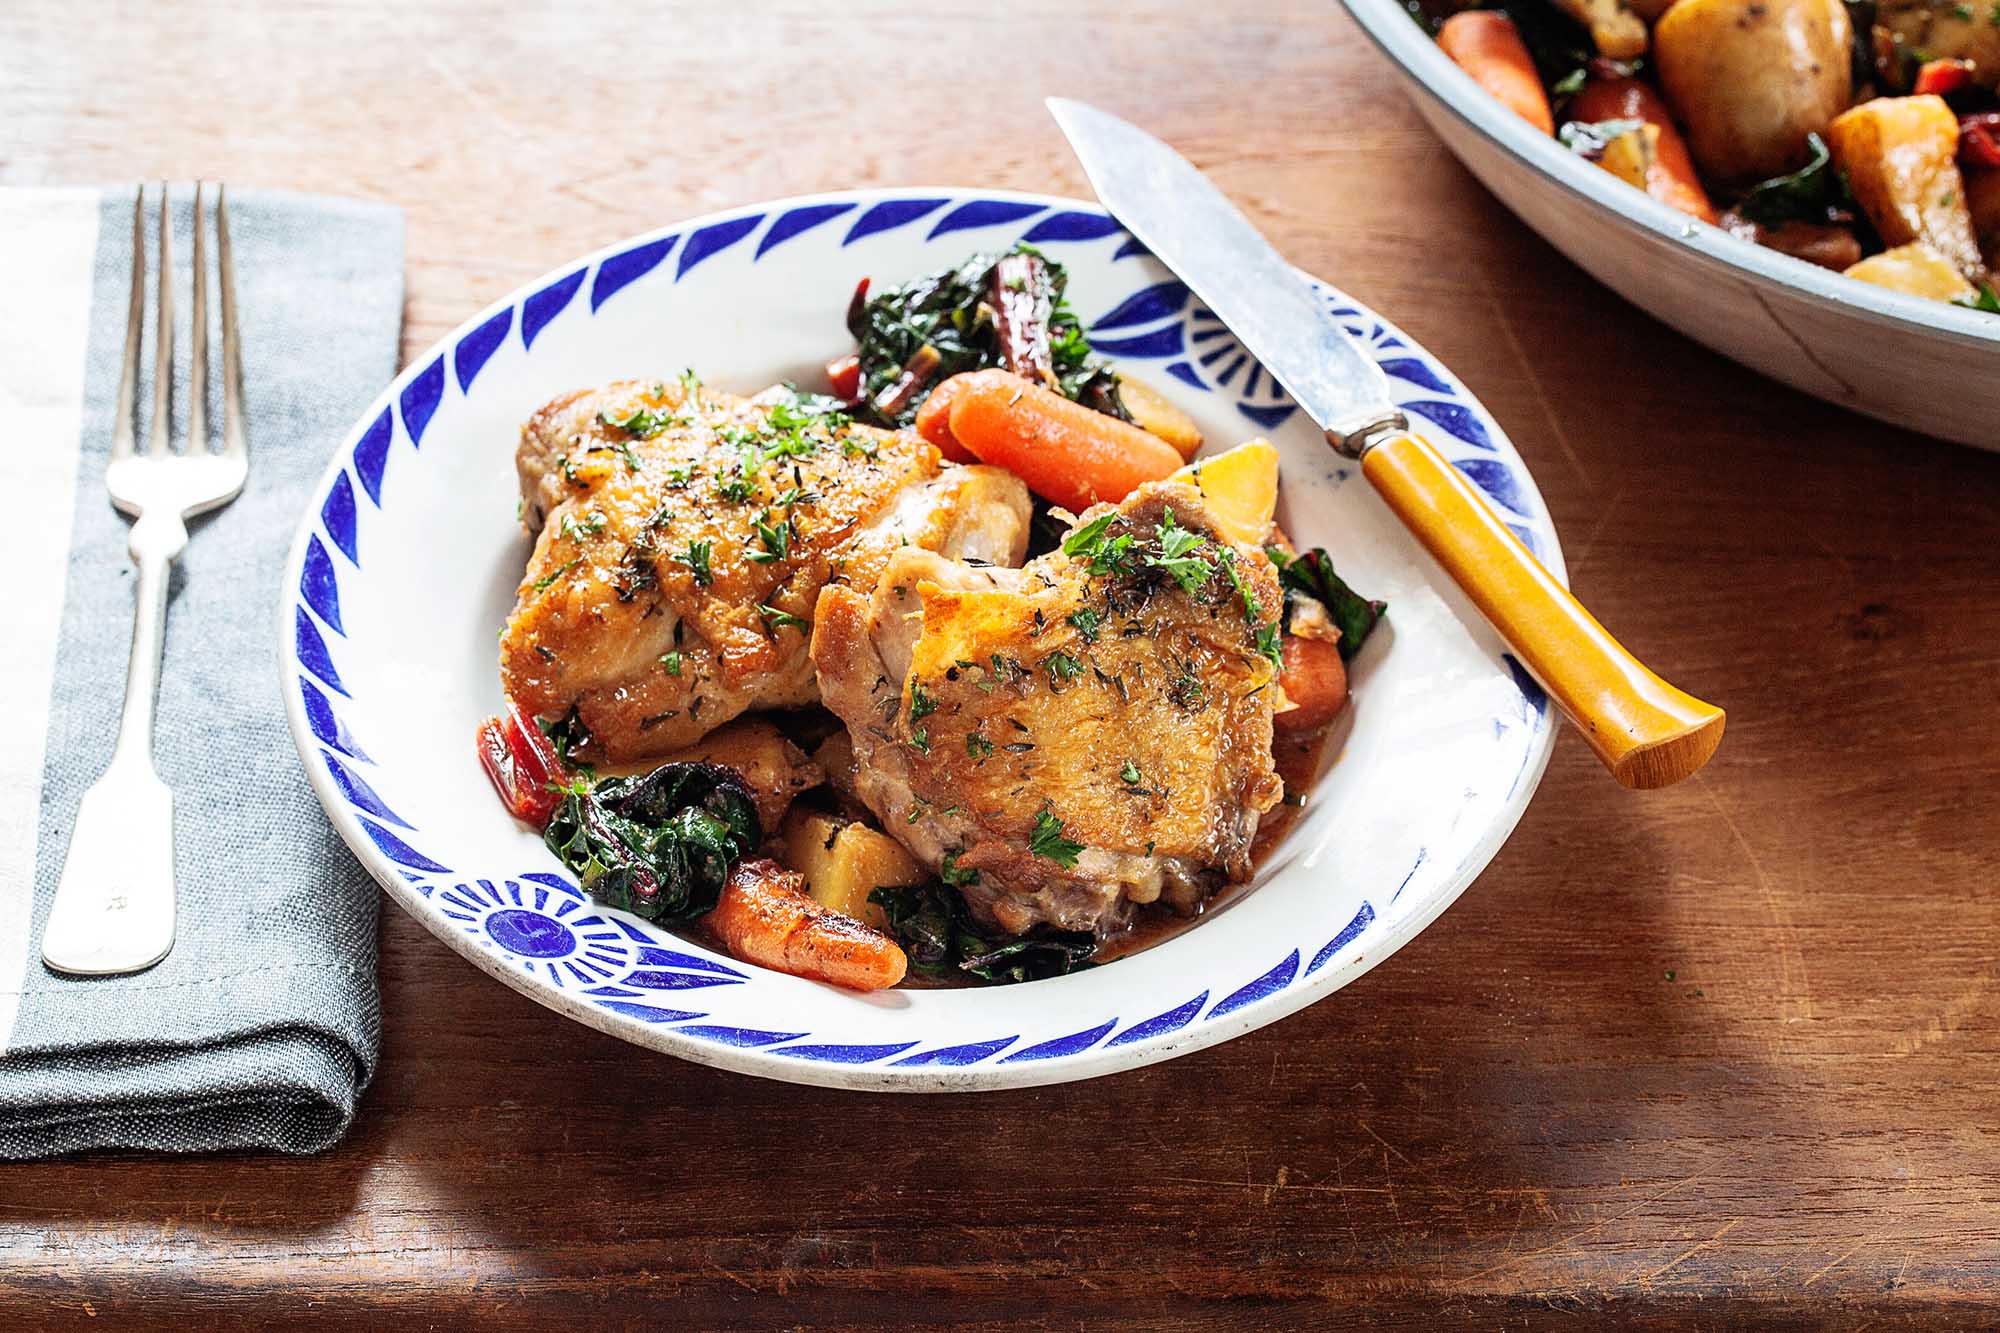 Two crispy skillet chicken thighs with baby carrots and wilted greens. The shallow bowl has a blue pattern around the edge. A yellow handled knife is on the right edge. A folded napkin has a fork on top. More of the skillet chicken thighs with potatoes, carrots and greens in a bowl partially visible in the upper right corner.